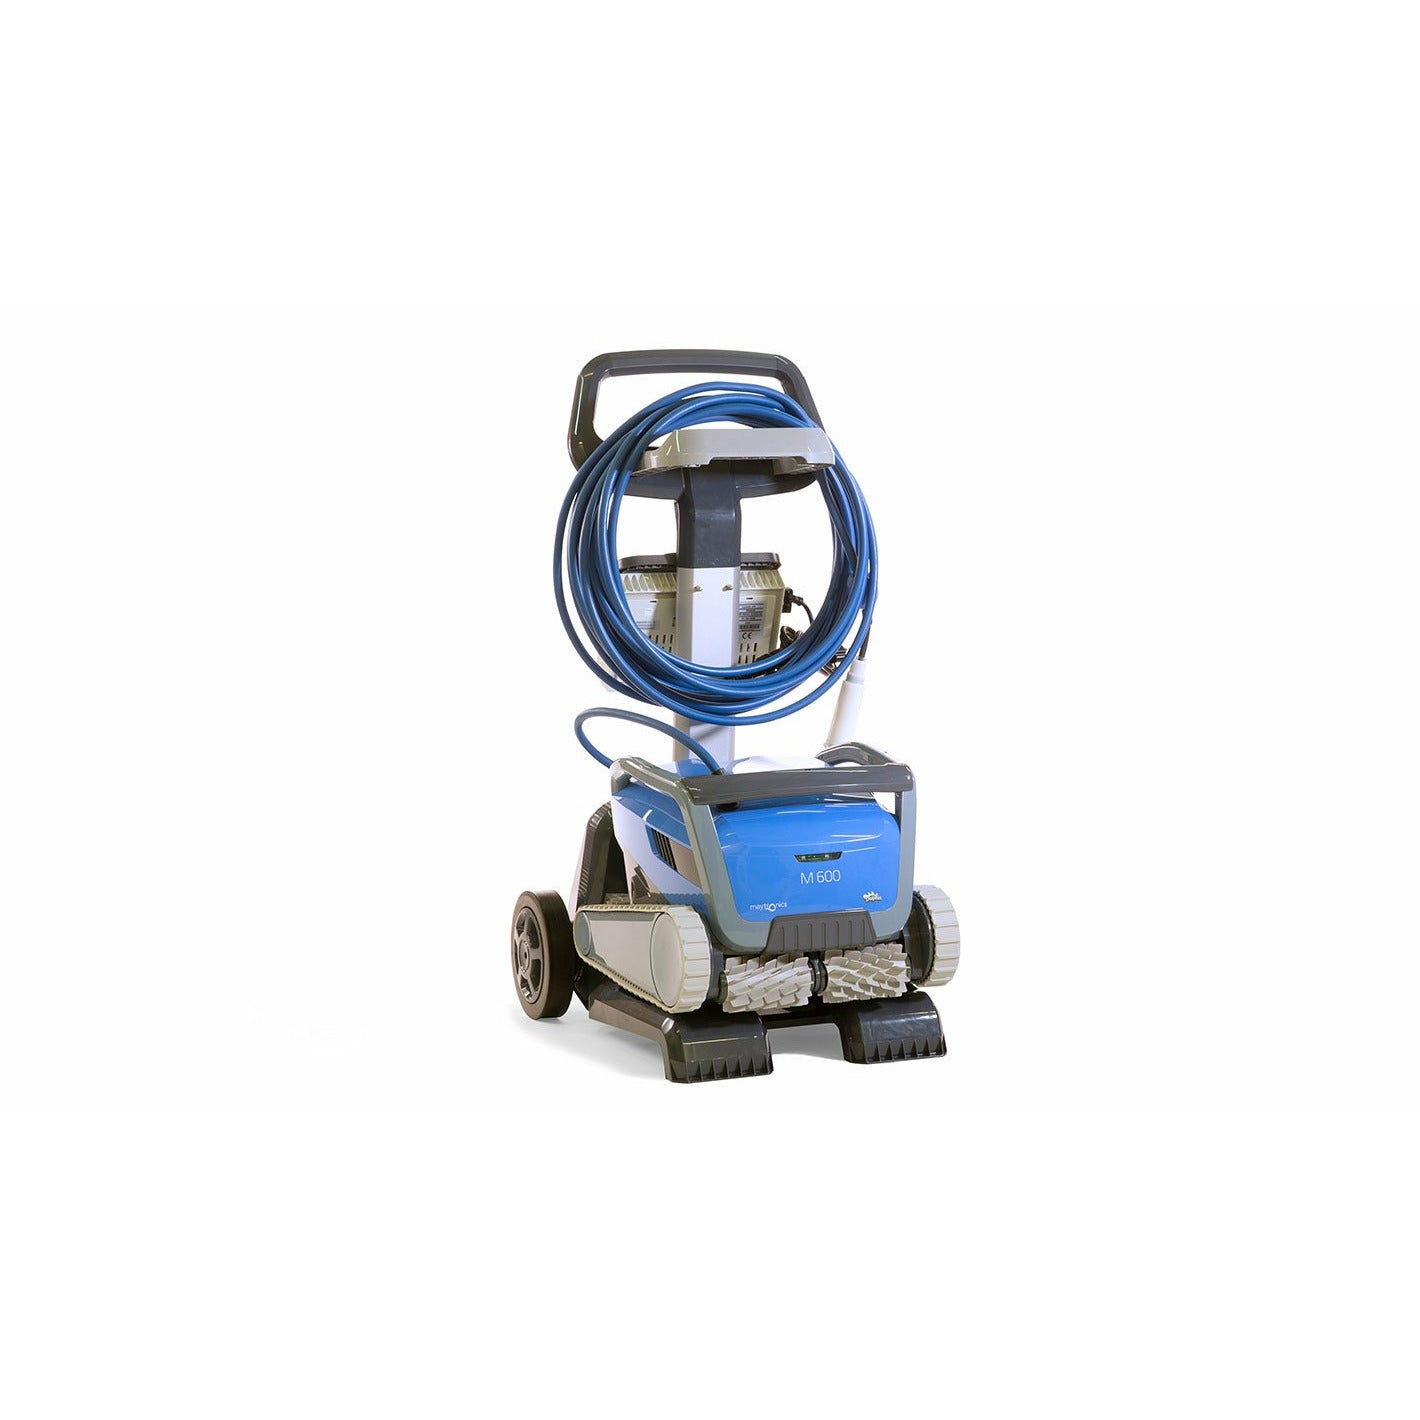 Ships Next Day New Maytronics Dolphin M600 Robotic Pool Cleaner